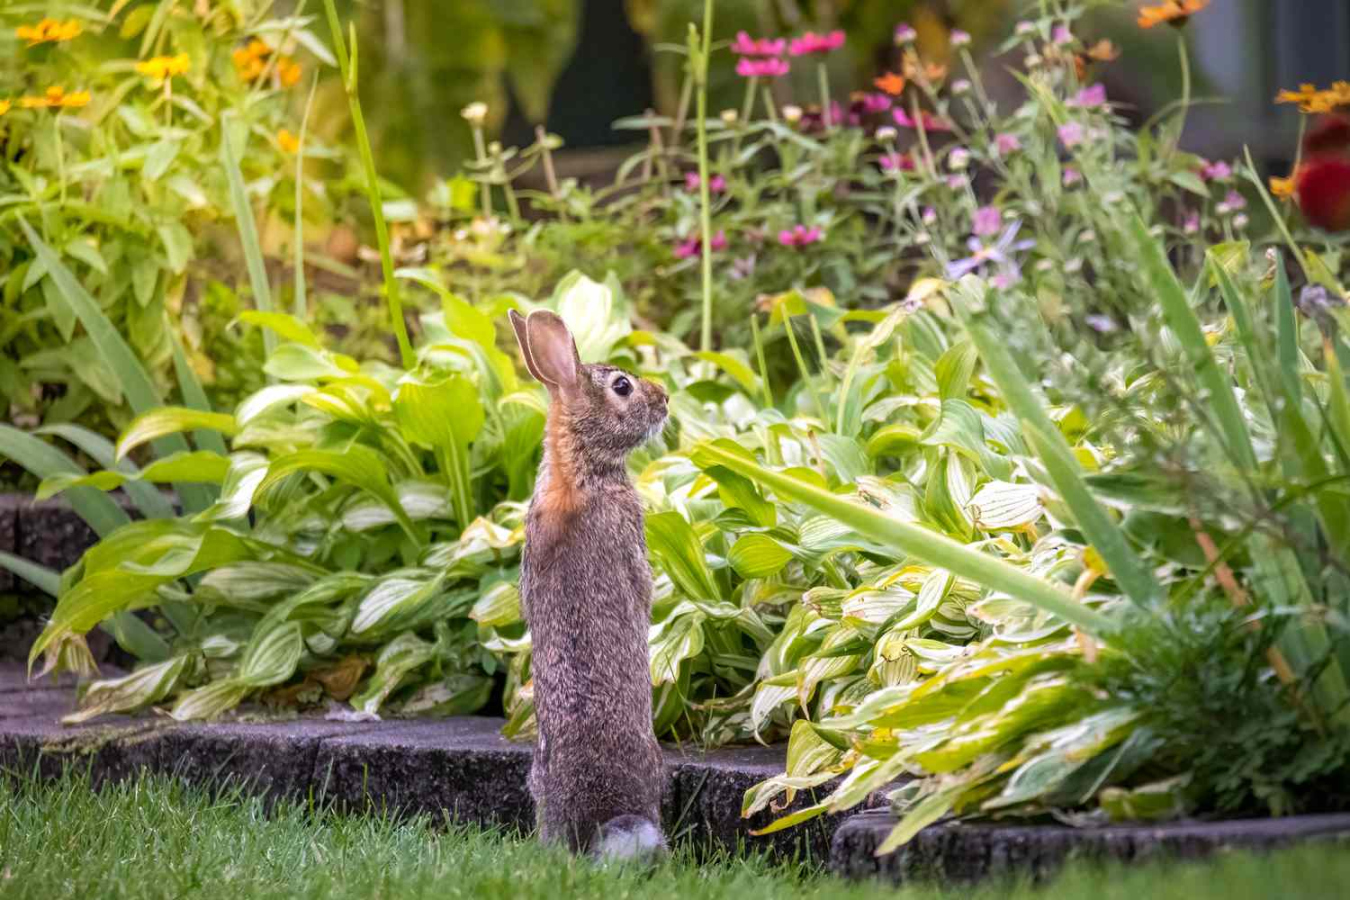 Sustainable Ways to Keep Rabbits Out of Your Garden